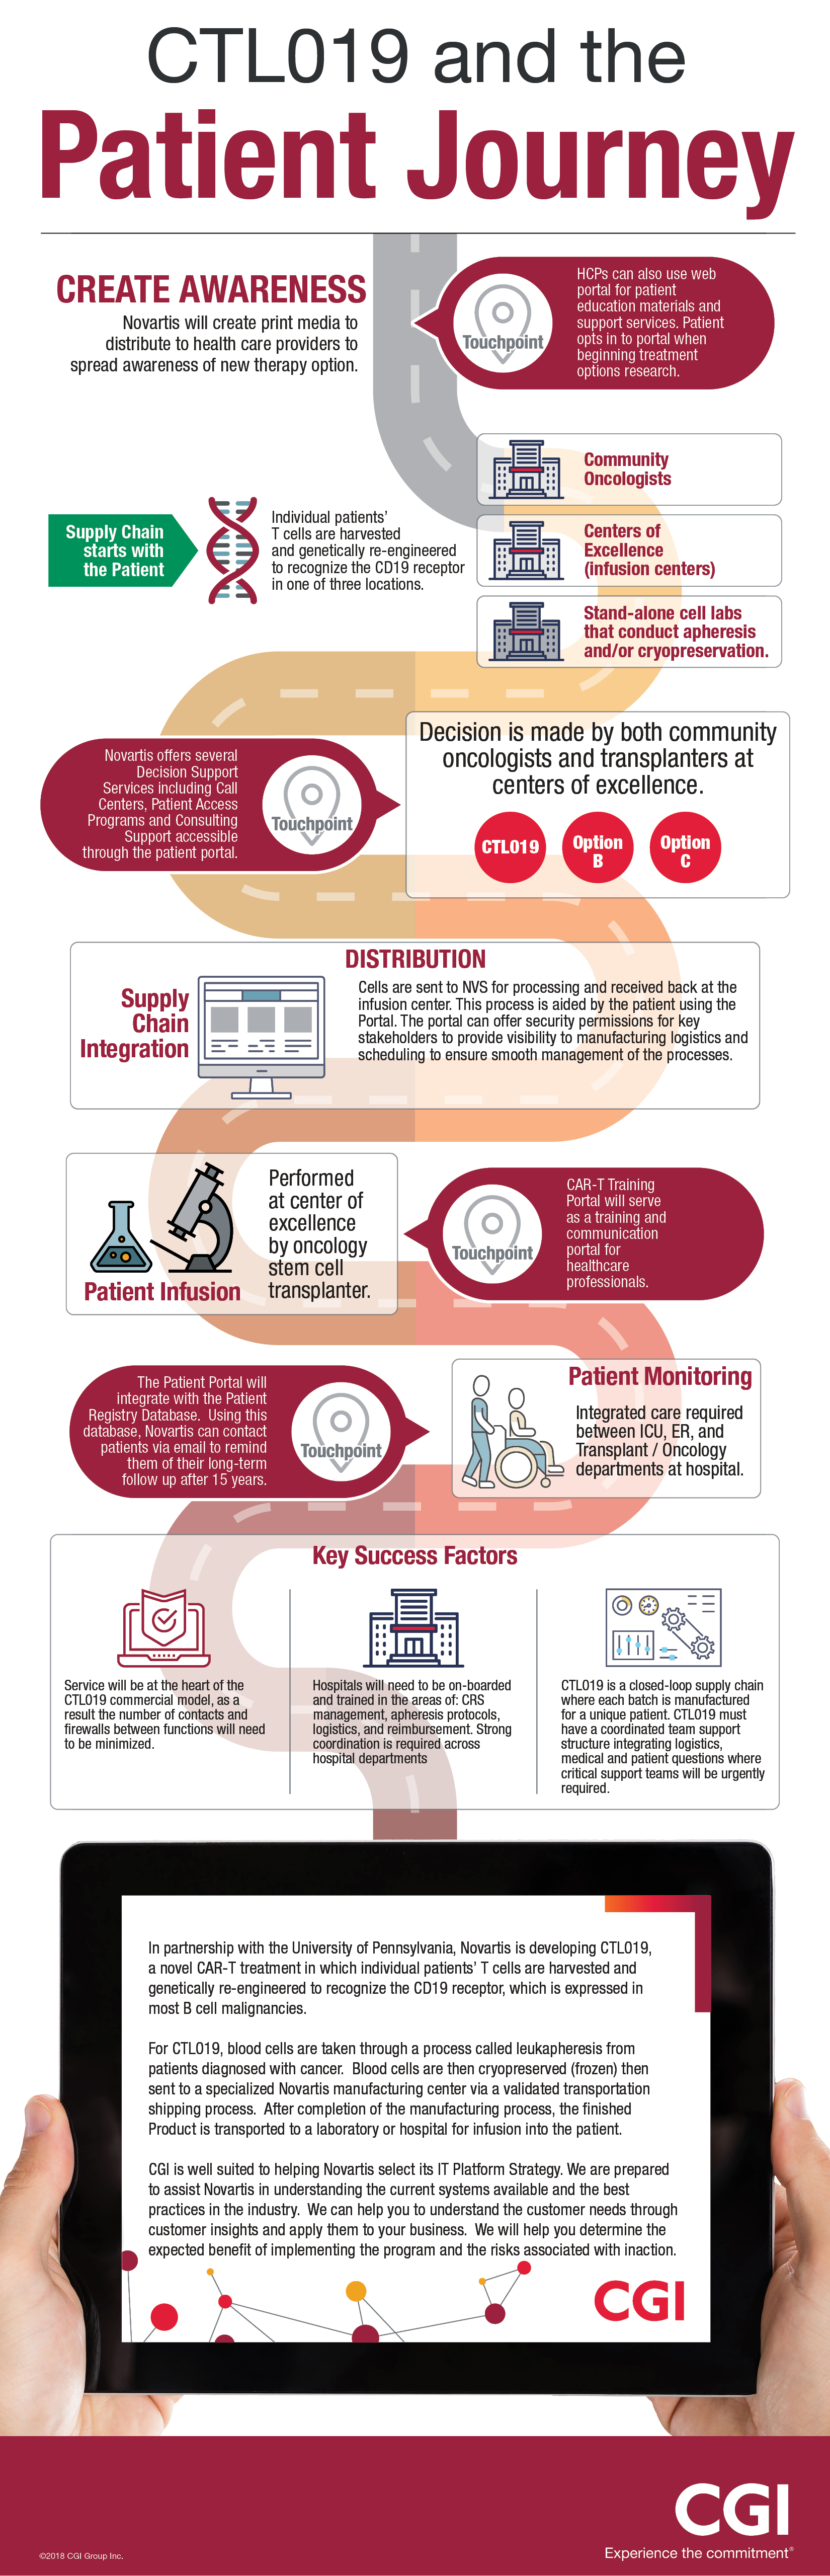 Business-to-business marketing infographic